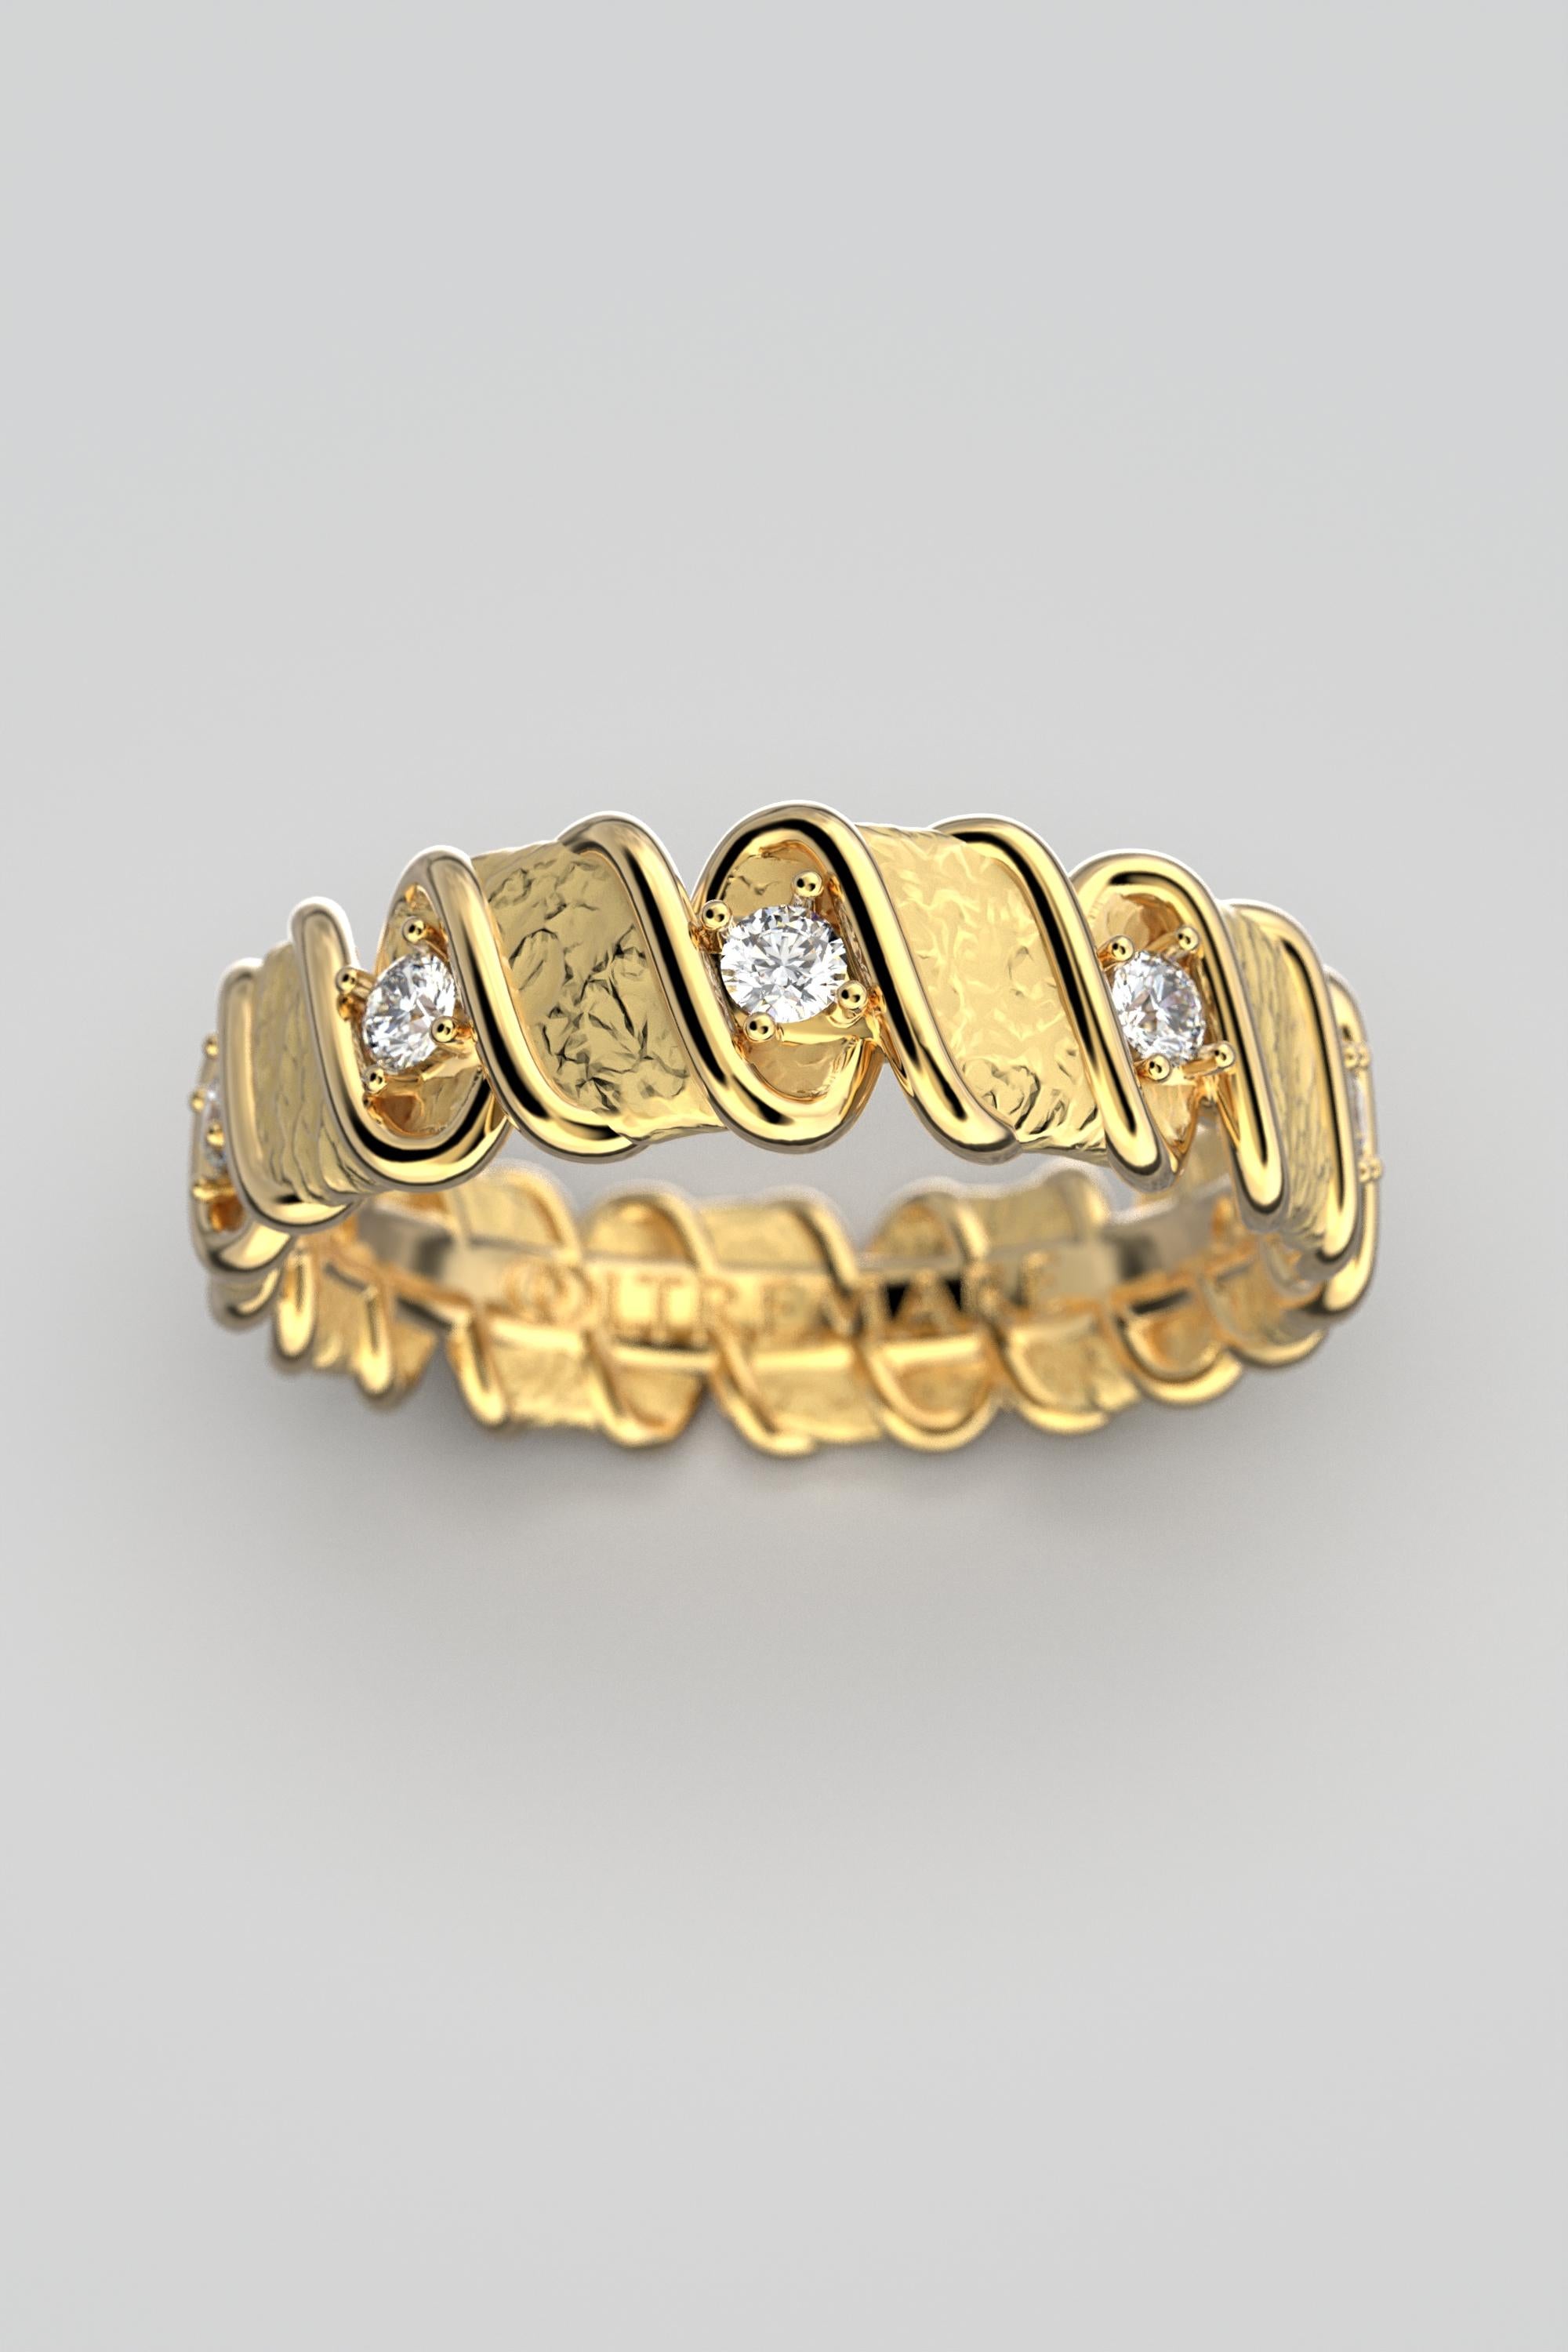 For Sale:  14k Italian Gold Eternity Band with Natural Diamonds  Oltremare Gioielli 2